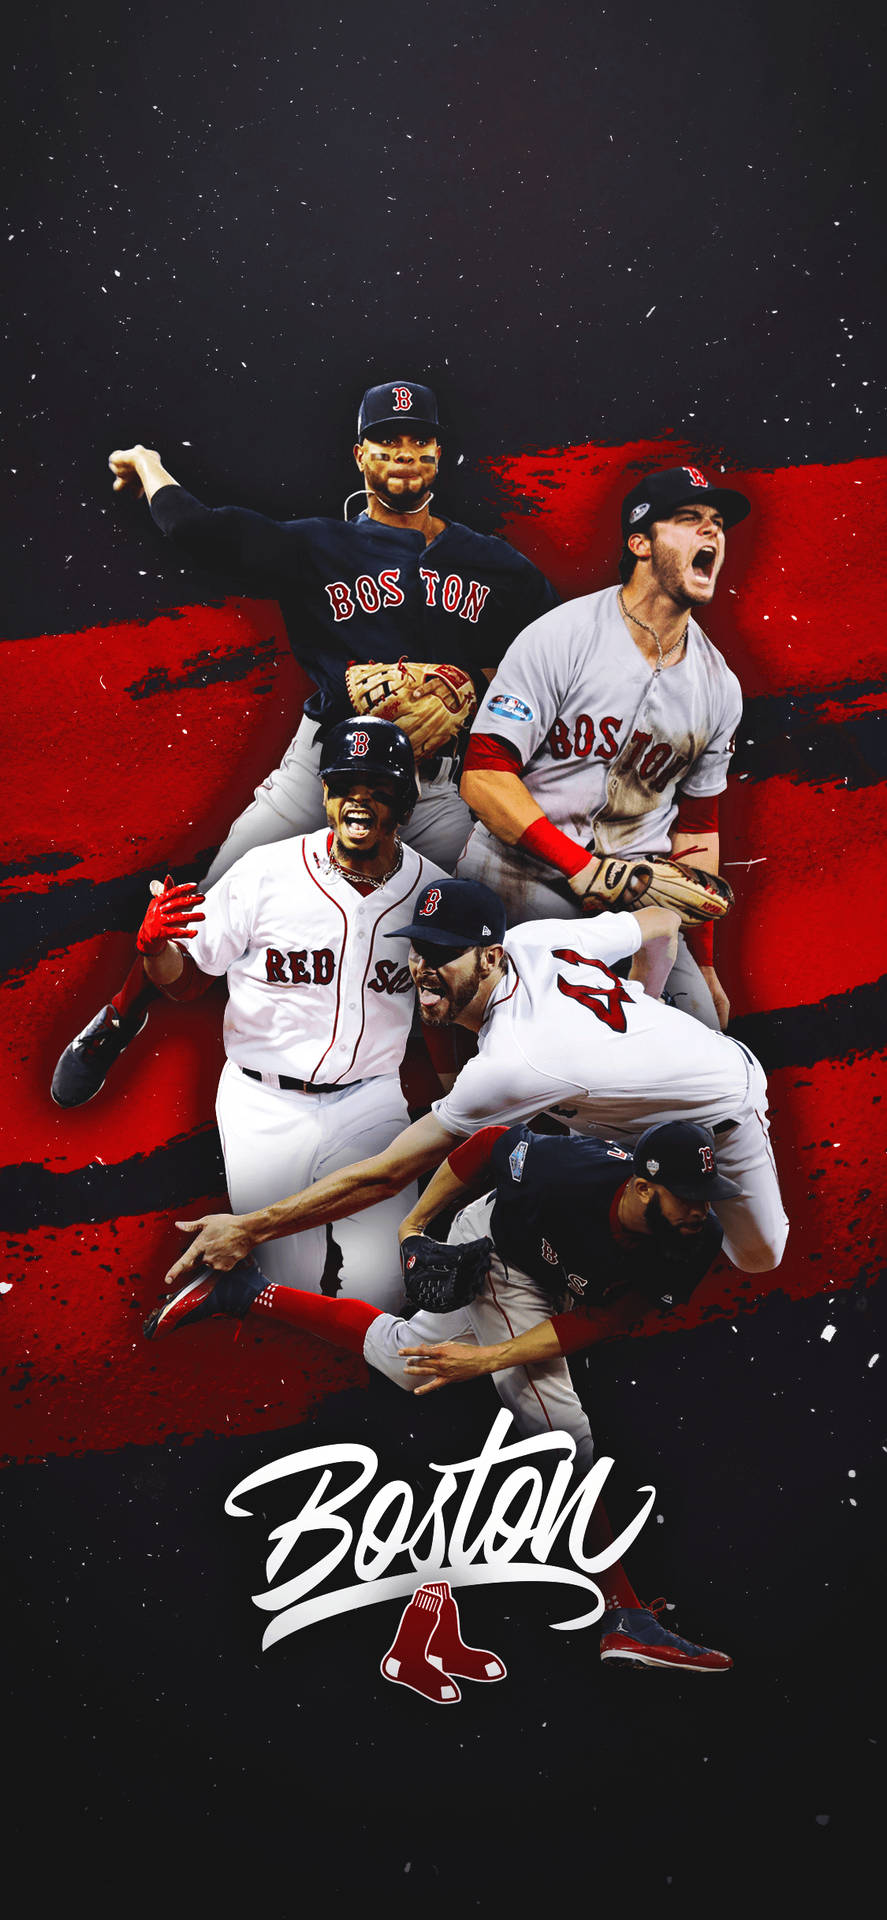 Boston Red Sox Star Players Background